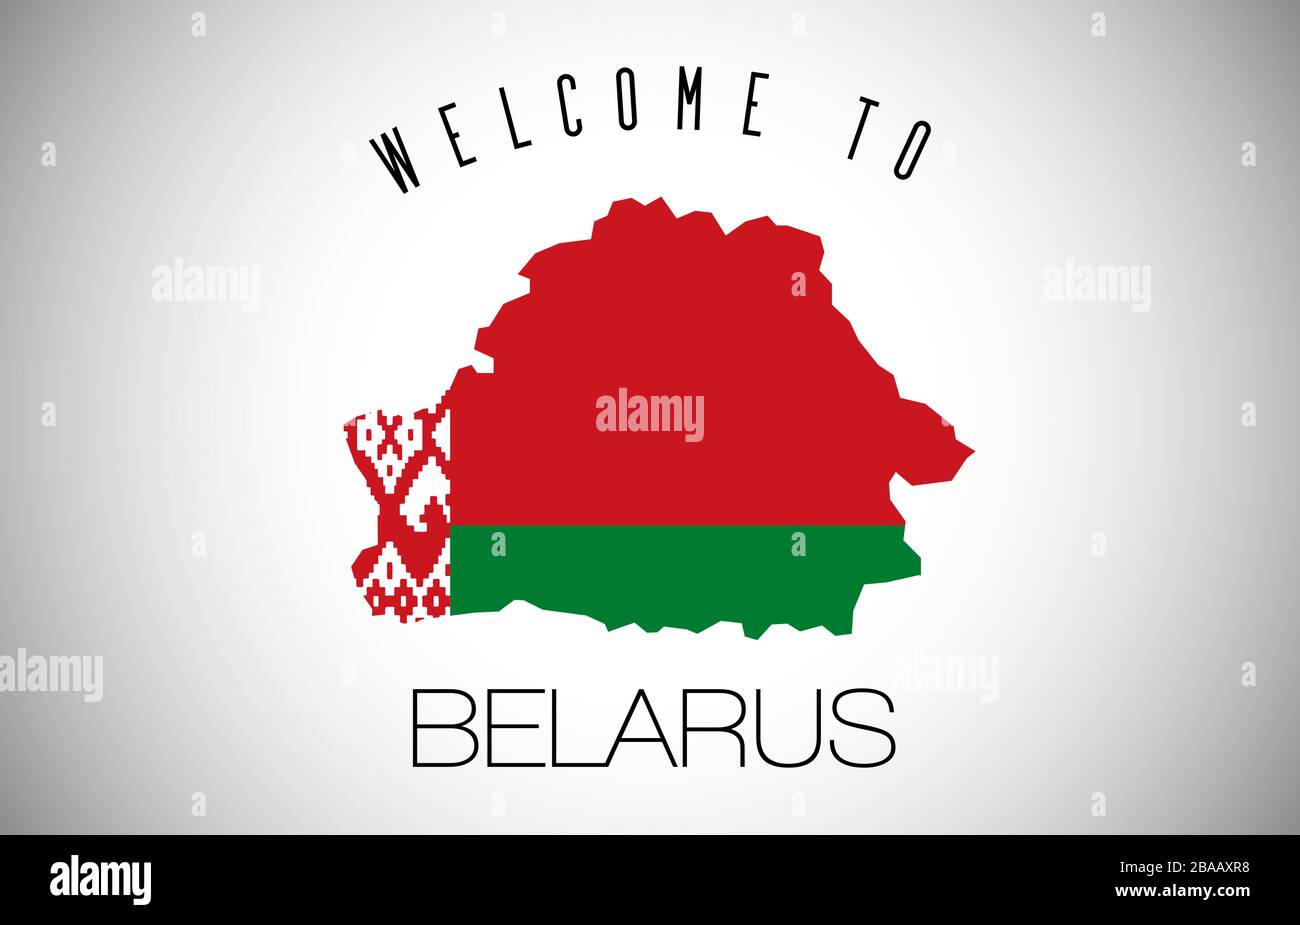 Belarus Welcome to Text and Country flag inside Country Border Map. Belarus map with national flag Vector Design Illustration. Stock Vector